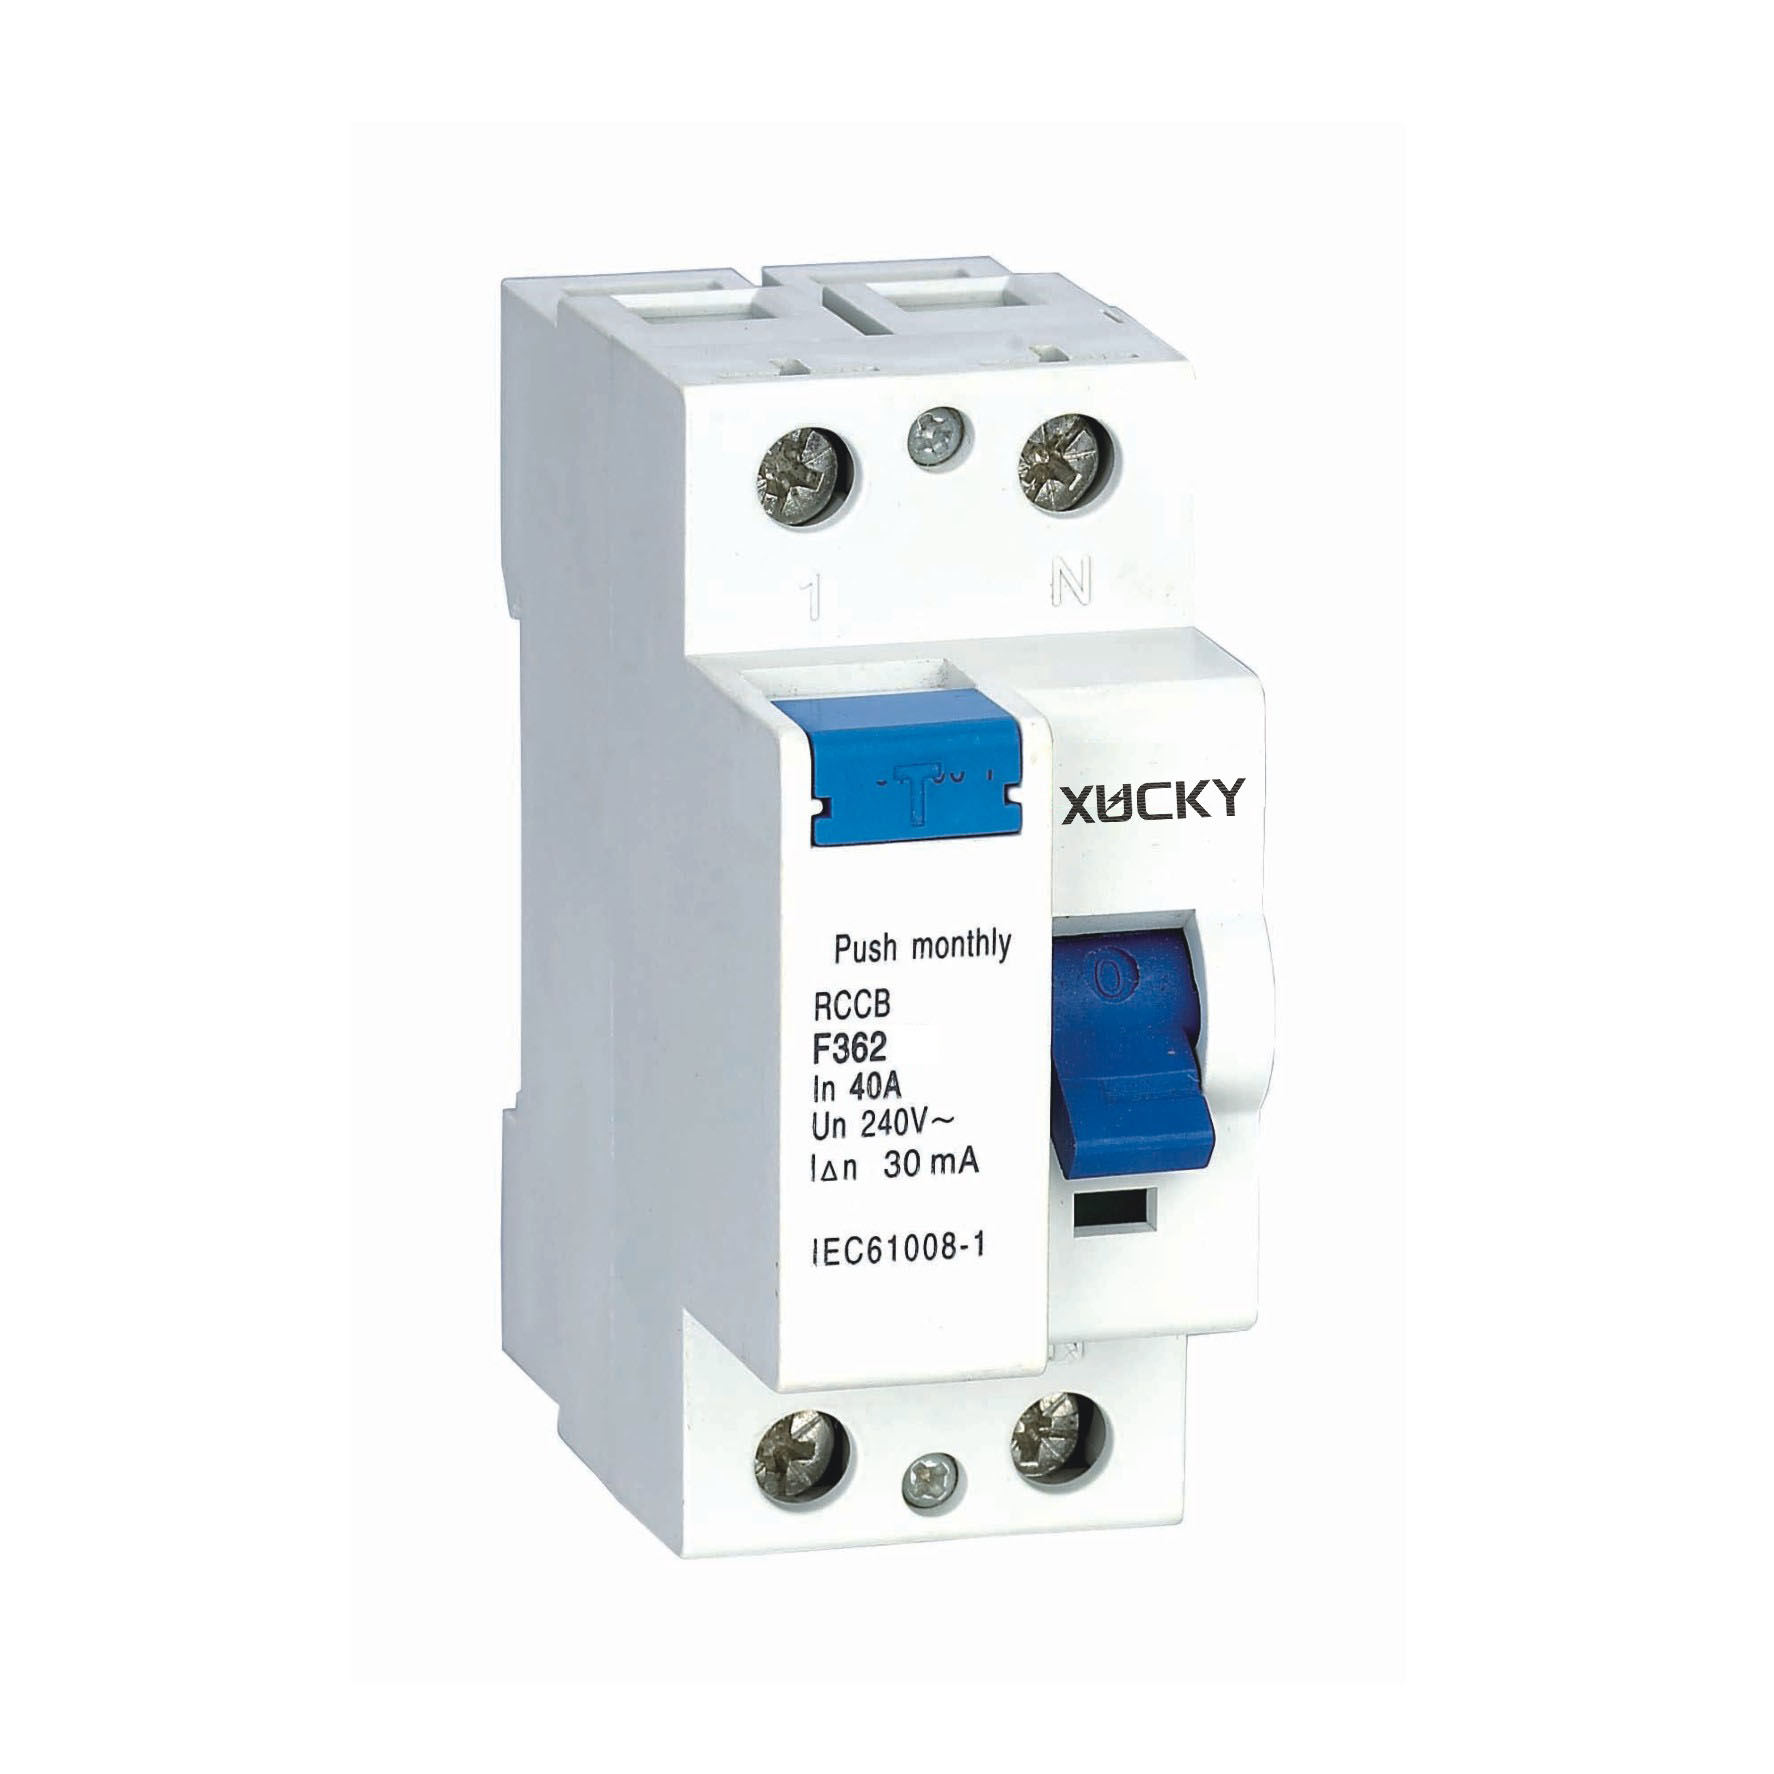 https://www.xucky.com/daf360-series-residual-current-circuit-breakers-product/